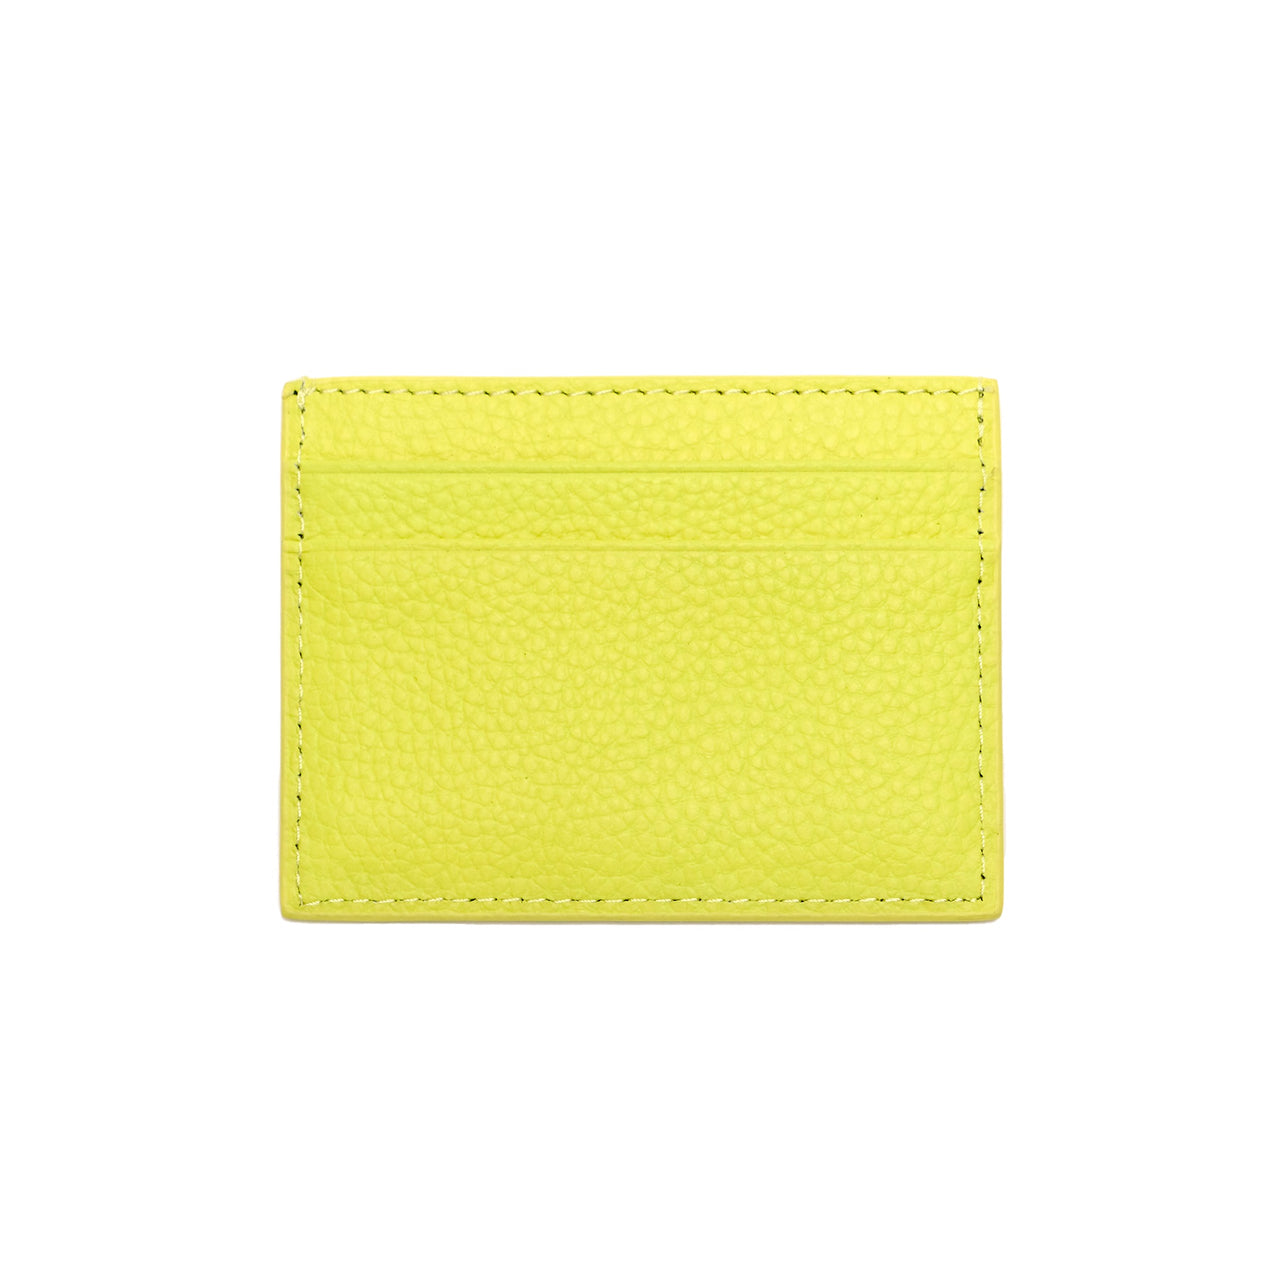 Neon Vibes, Ultimate Security: Ivory & Ebony Wallet in Bright Neon - Crafted from 100% Genuine Leather, RFID Blocking - Illuminate Your Everyday Carry.